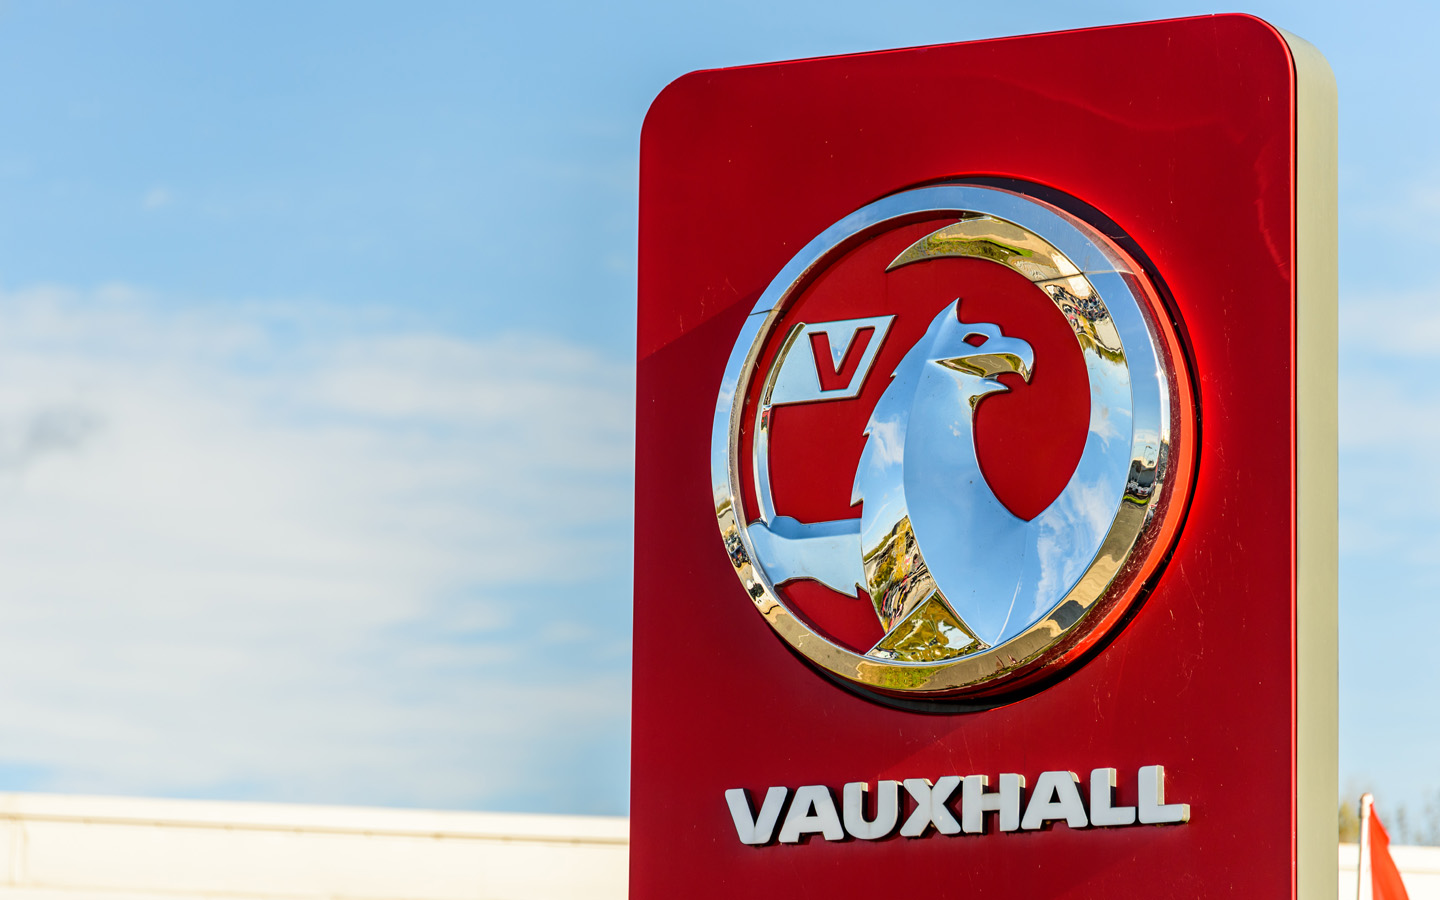 brand sign of vauxhall